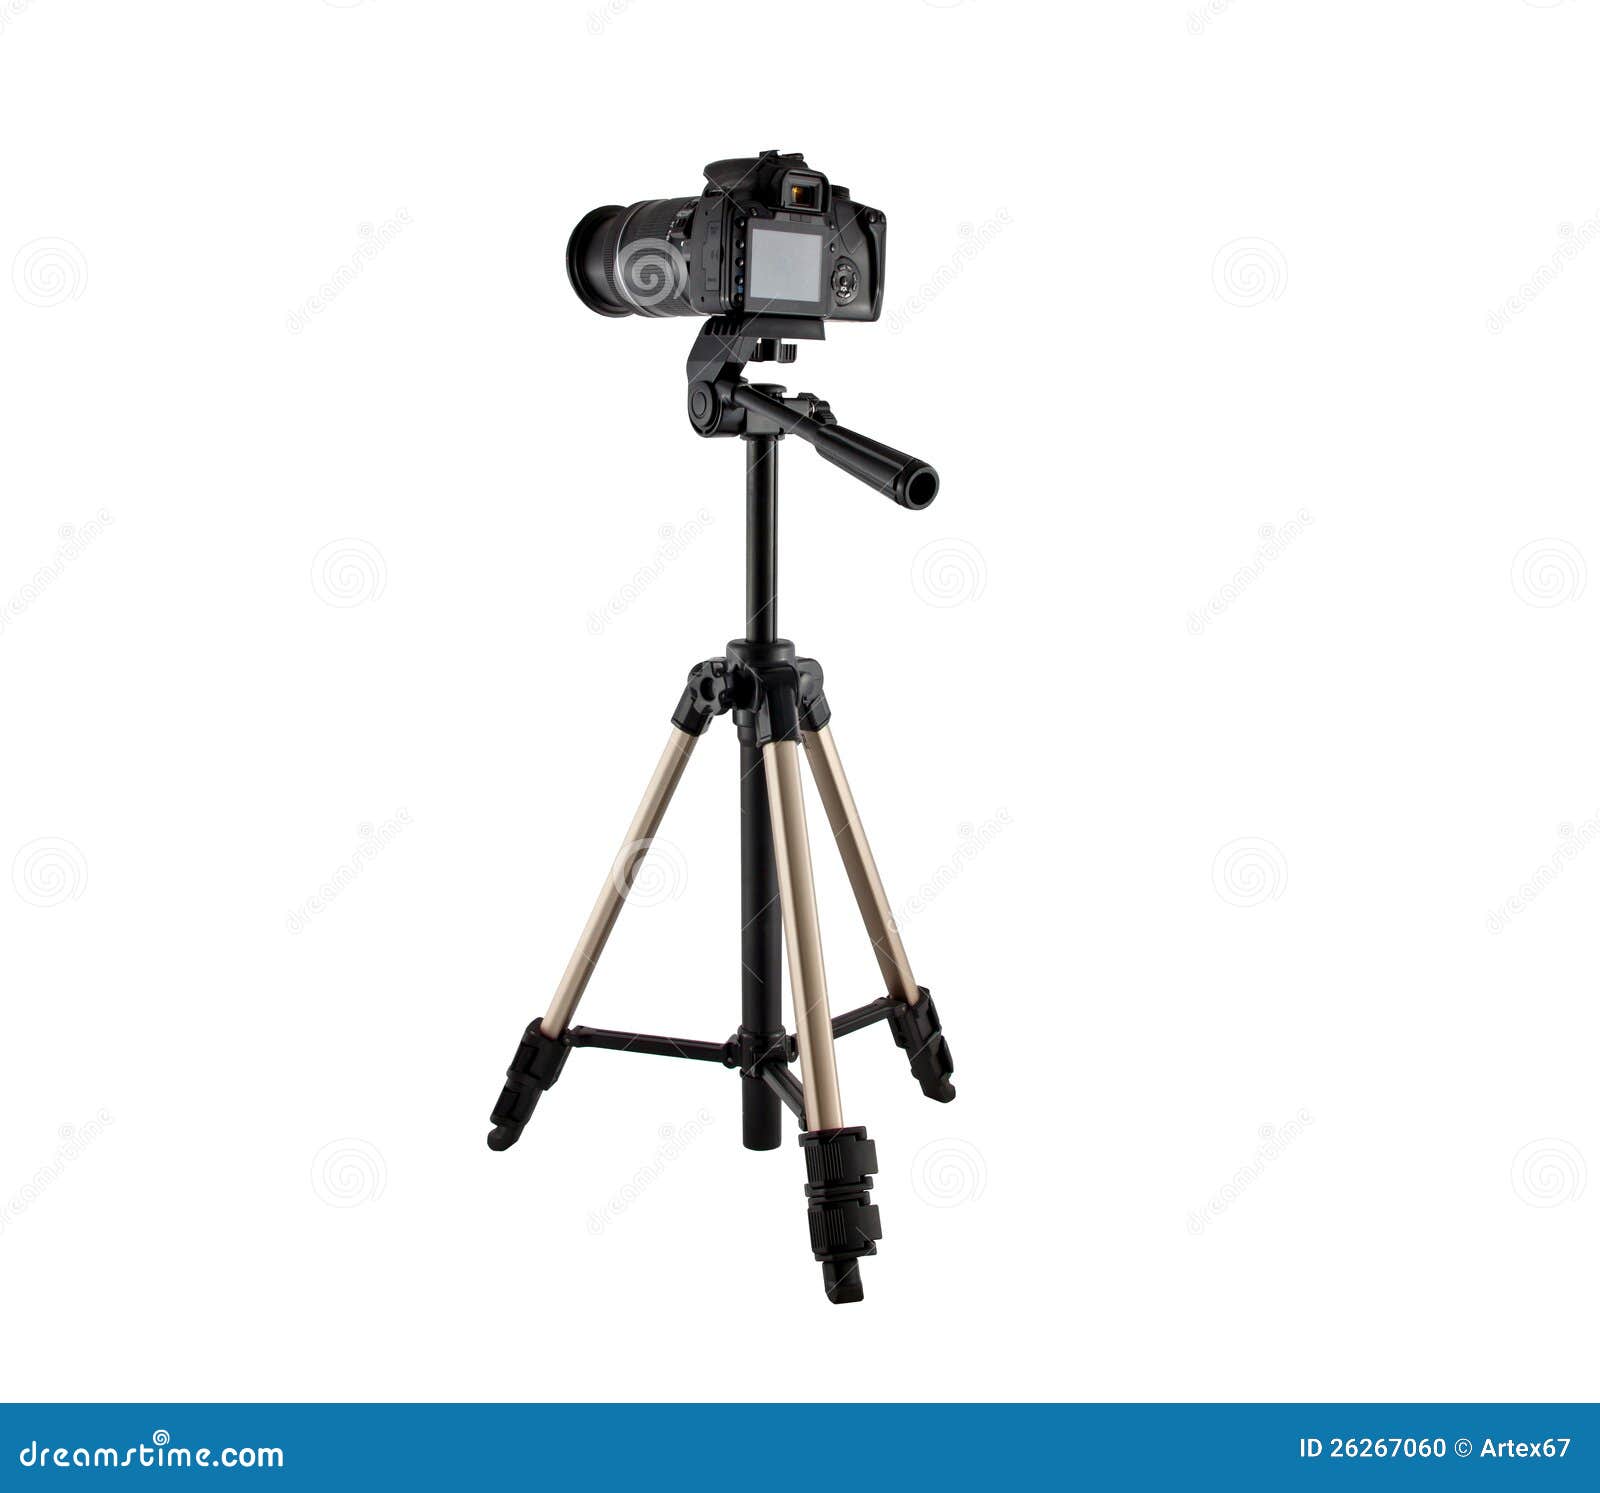 camera stand clipart - photo #12